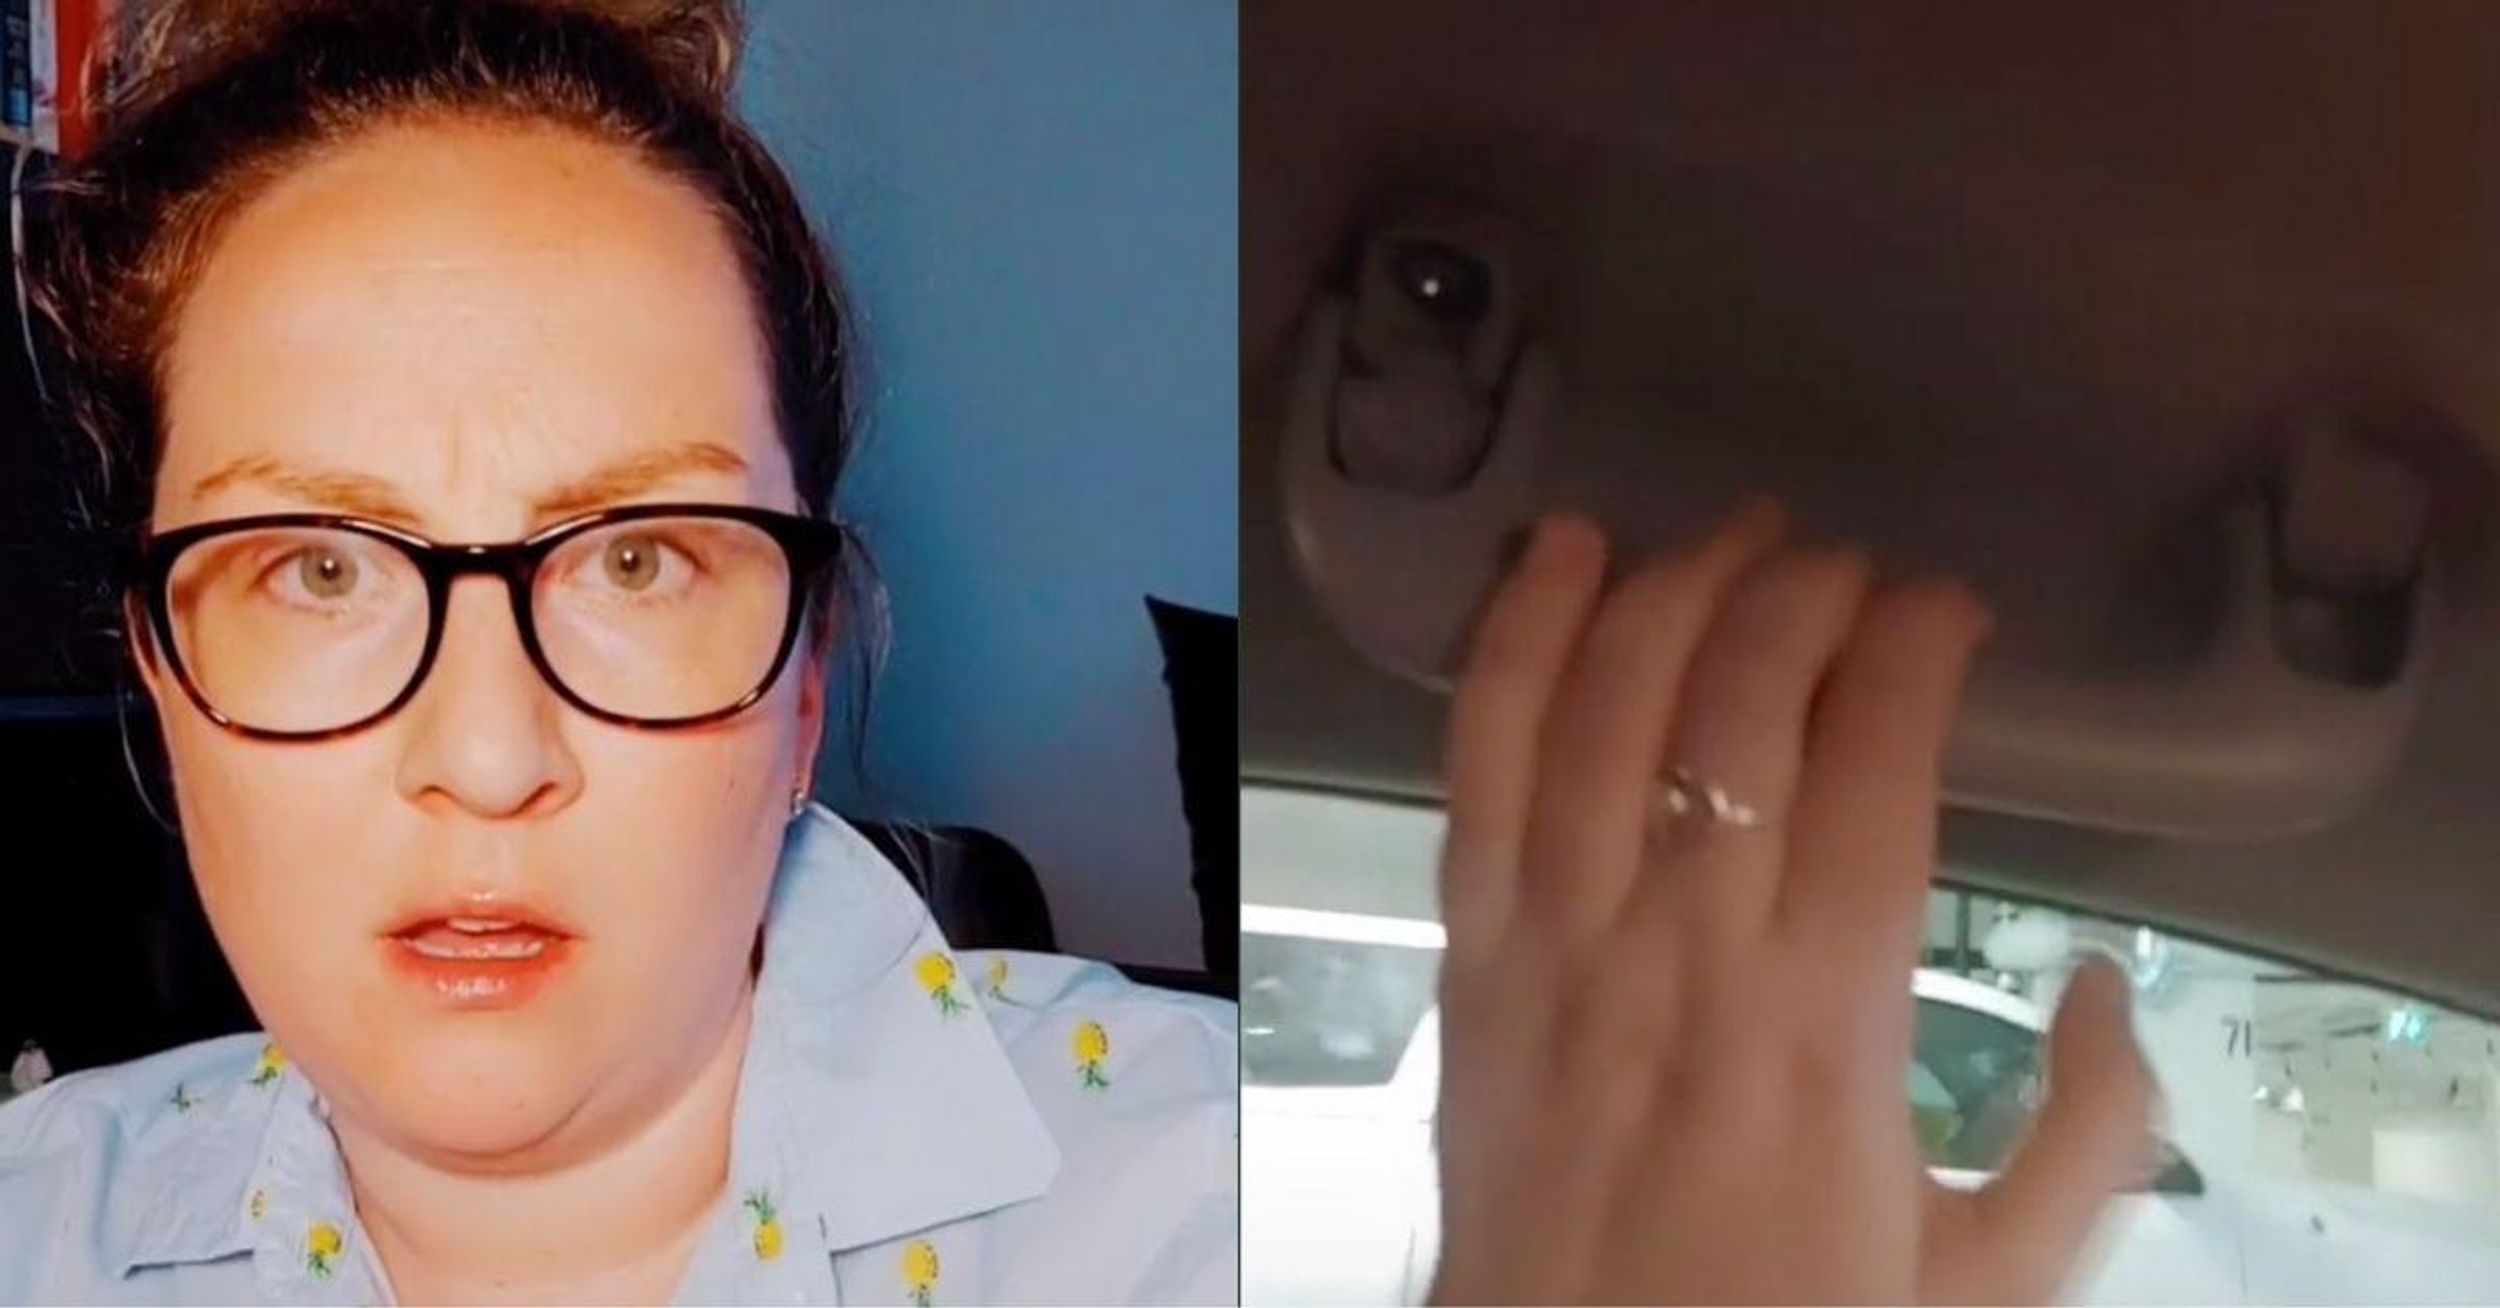 Woman Flabbergasted After Learning How To Properly Use Handles Inside Car From TikTok—And, Same